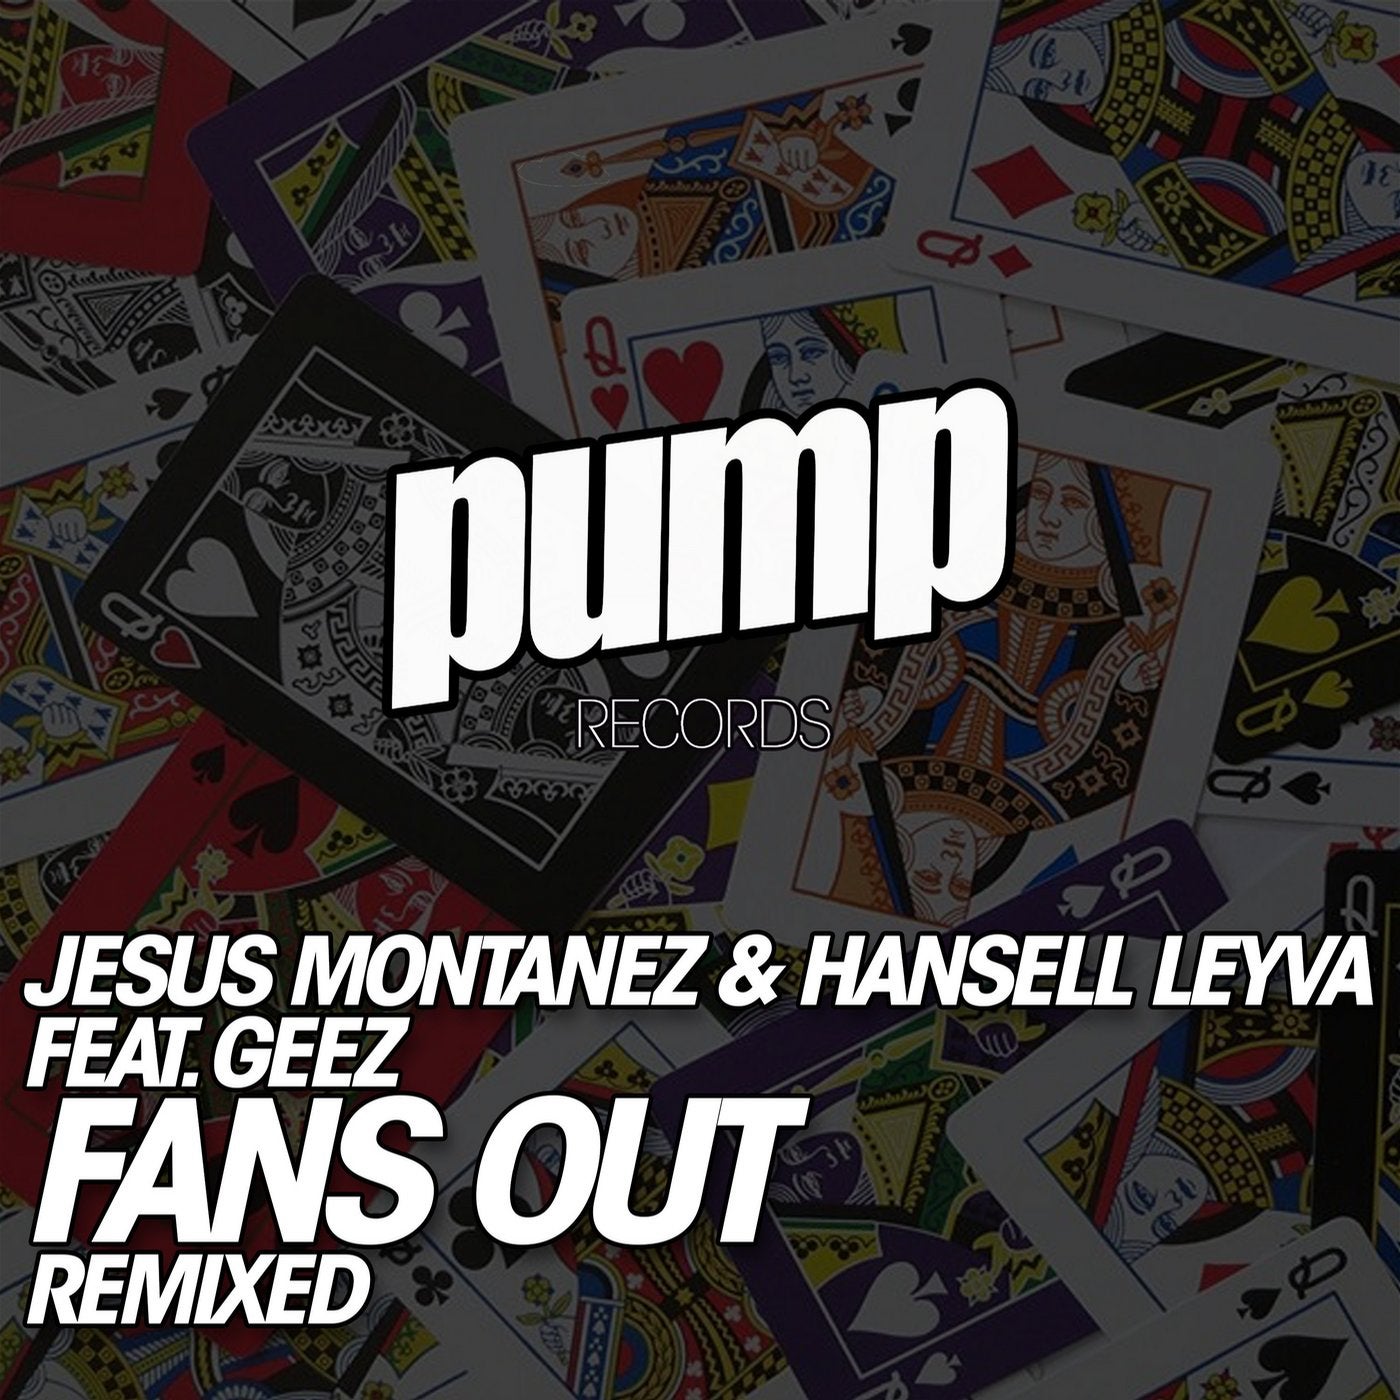 Fans Out Remixed